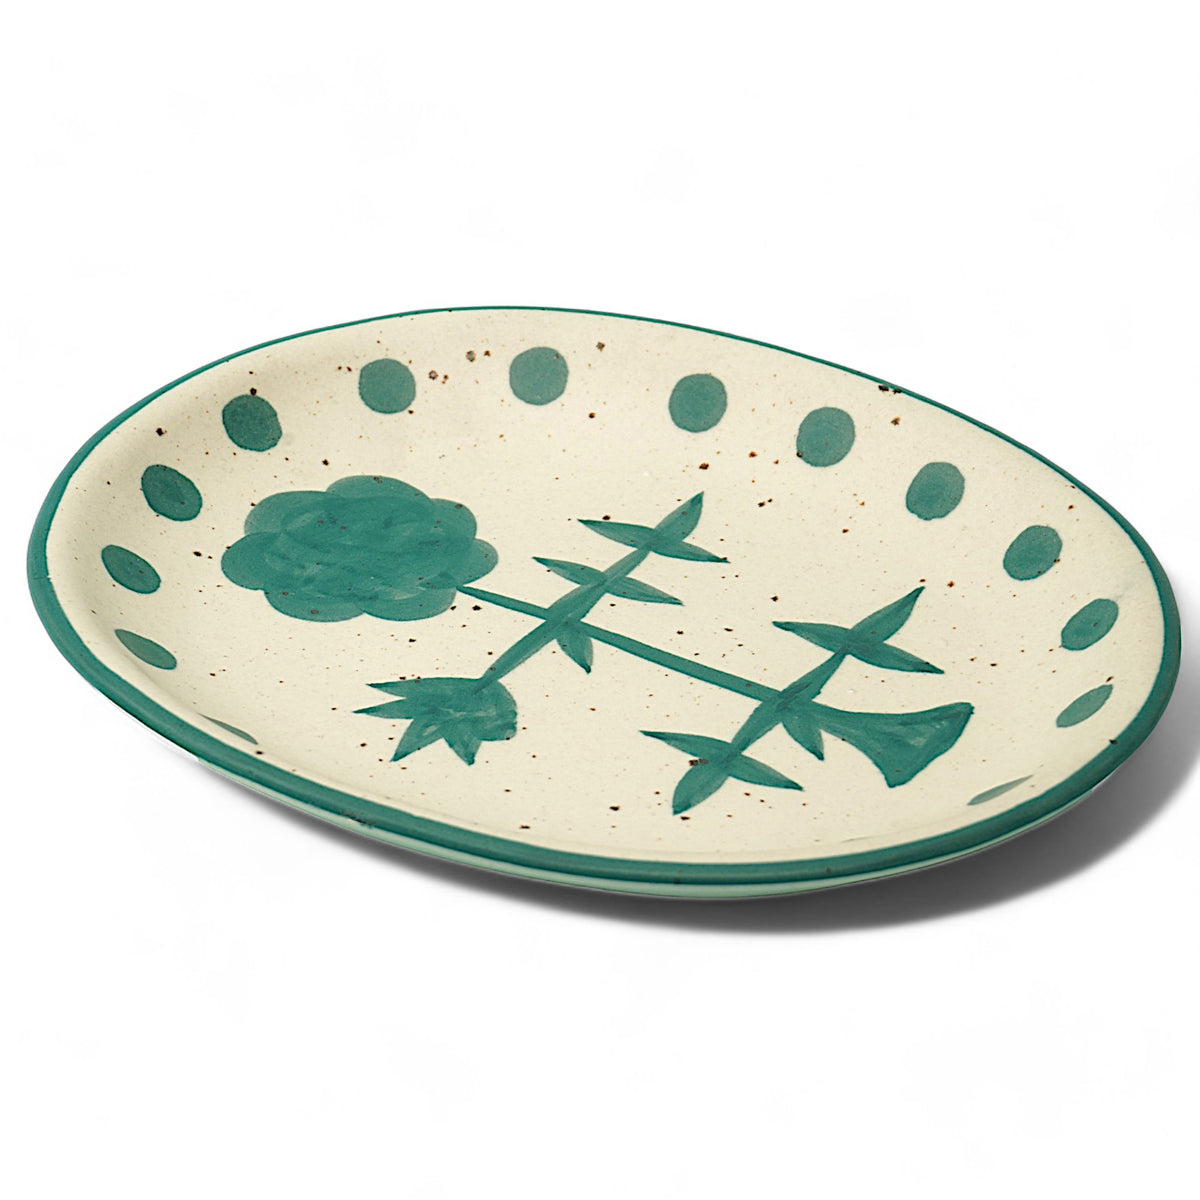 Claymistry Ceramic Snacks White with Green Flowers Round Serving Tray | 26cm * 21cm * 3cm | Matte Finish | Dishwasher, Oven & Microwave Safe | Biscuit, Namkeen, Chips, Tray | Premium Kitchen Crockery